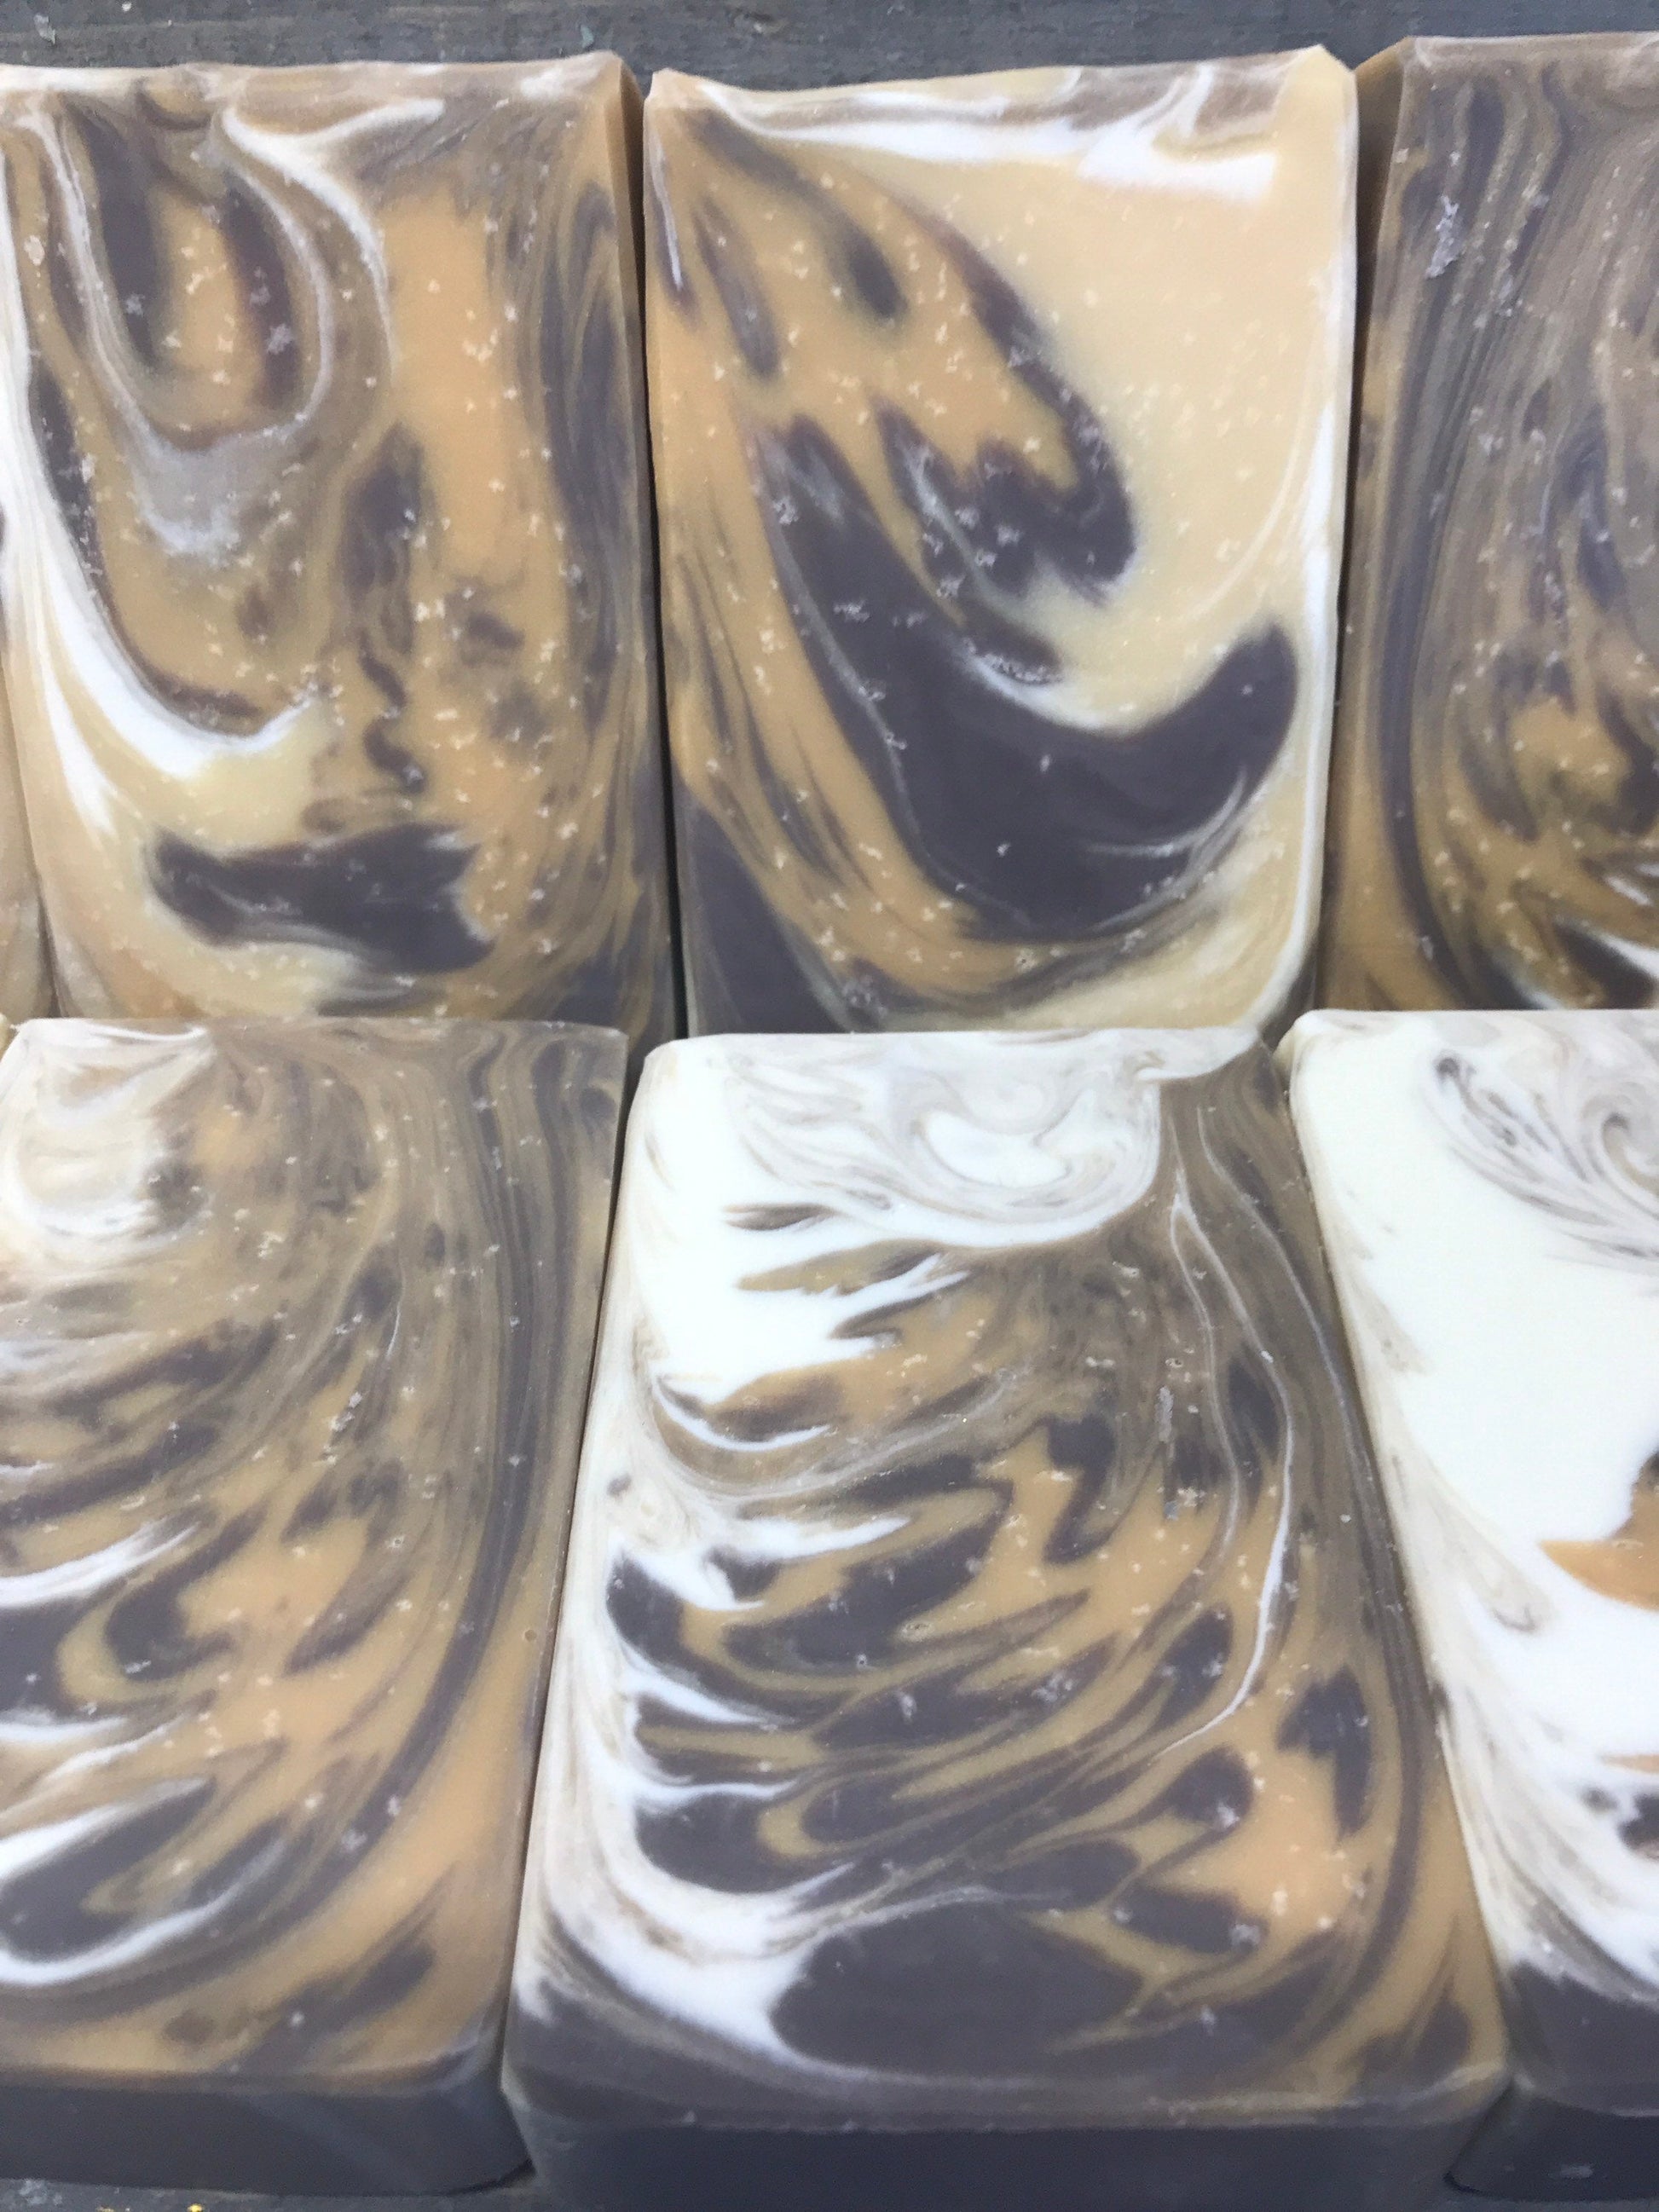 A photo showing detail of a Unscented Soap bar with browns and cream colors.